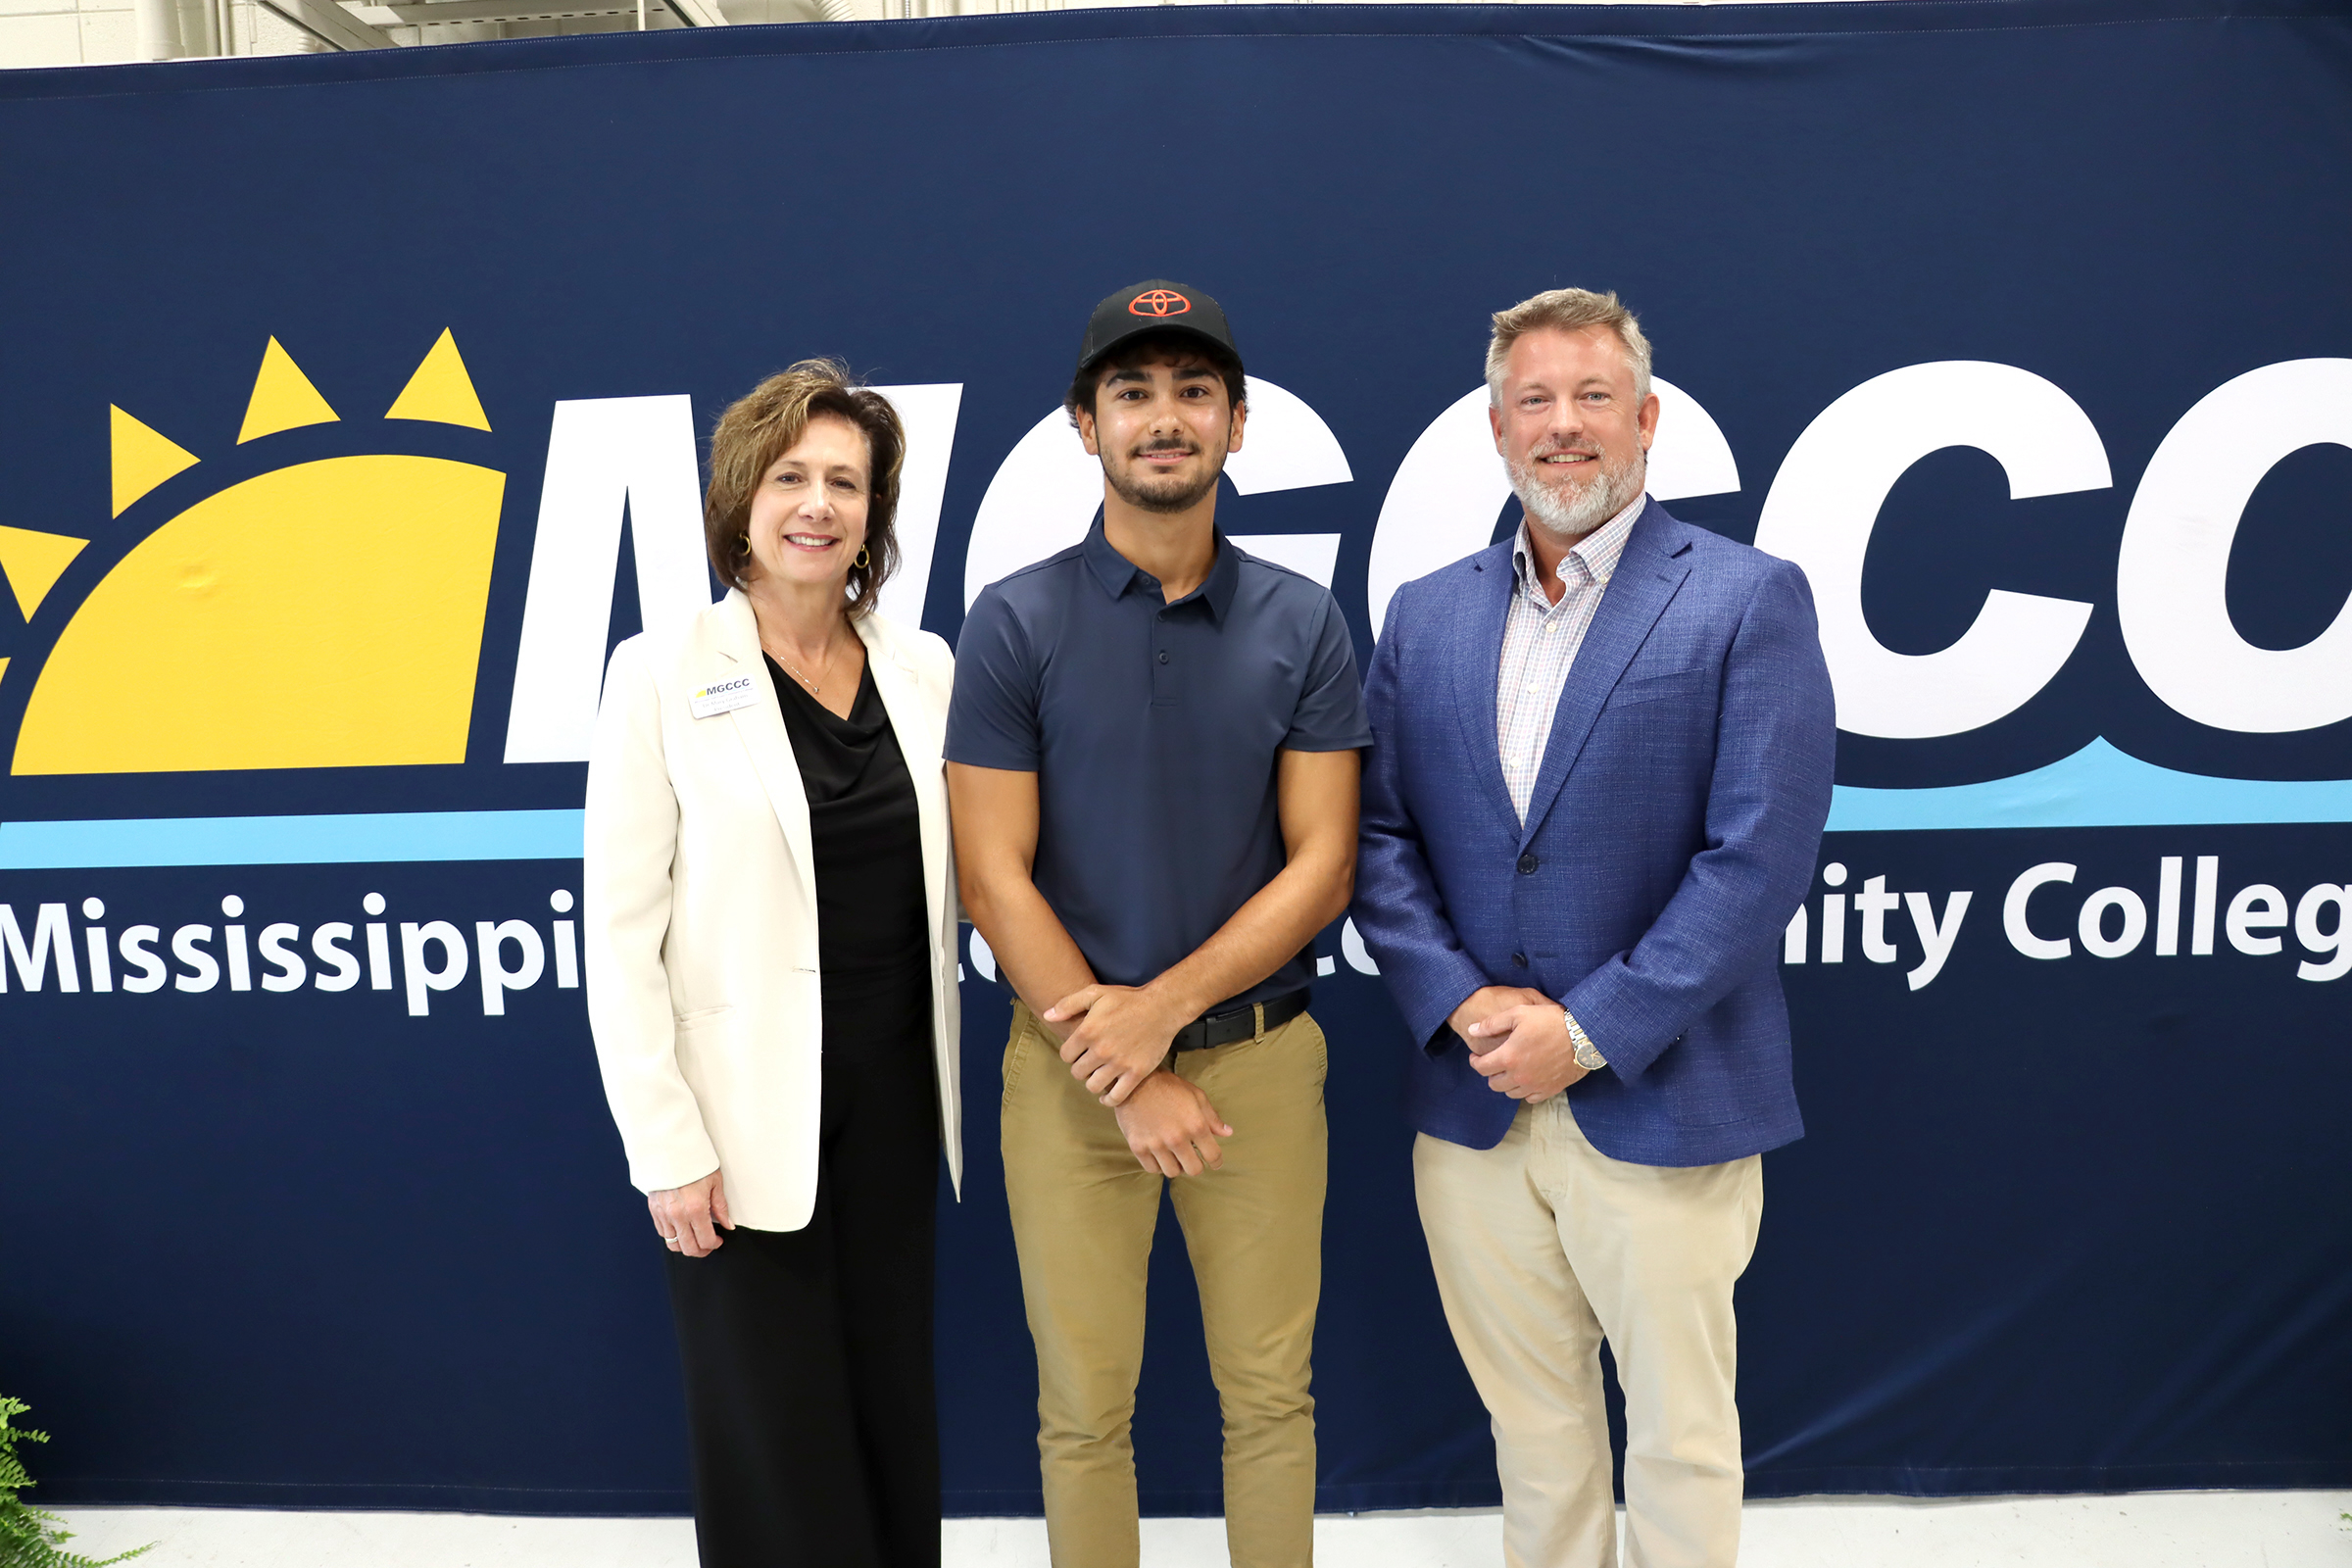 MGCCC and J. Allen Automotive Group Sign Agreement for Innovative Apprenticeship Program